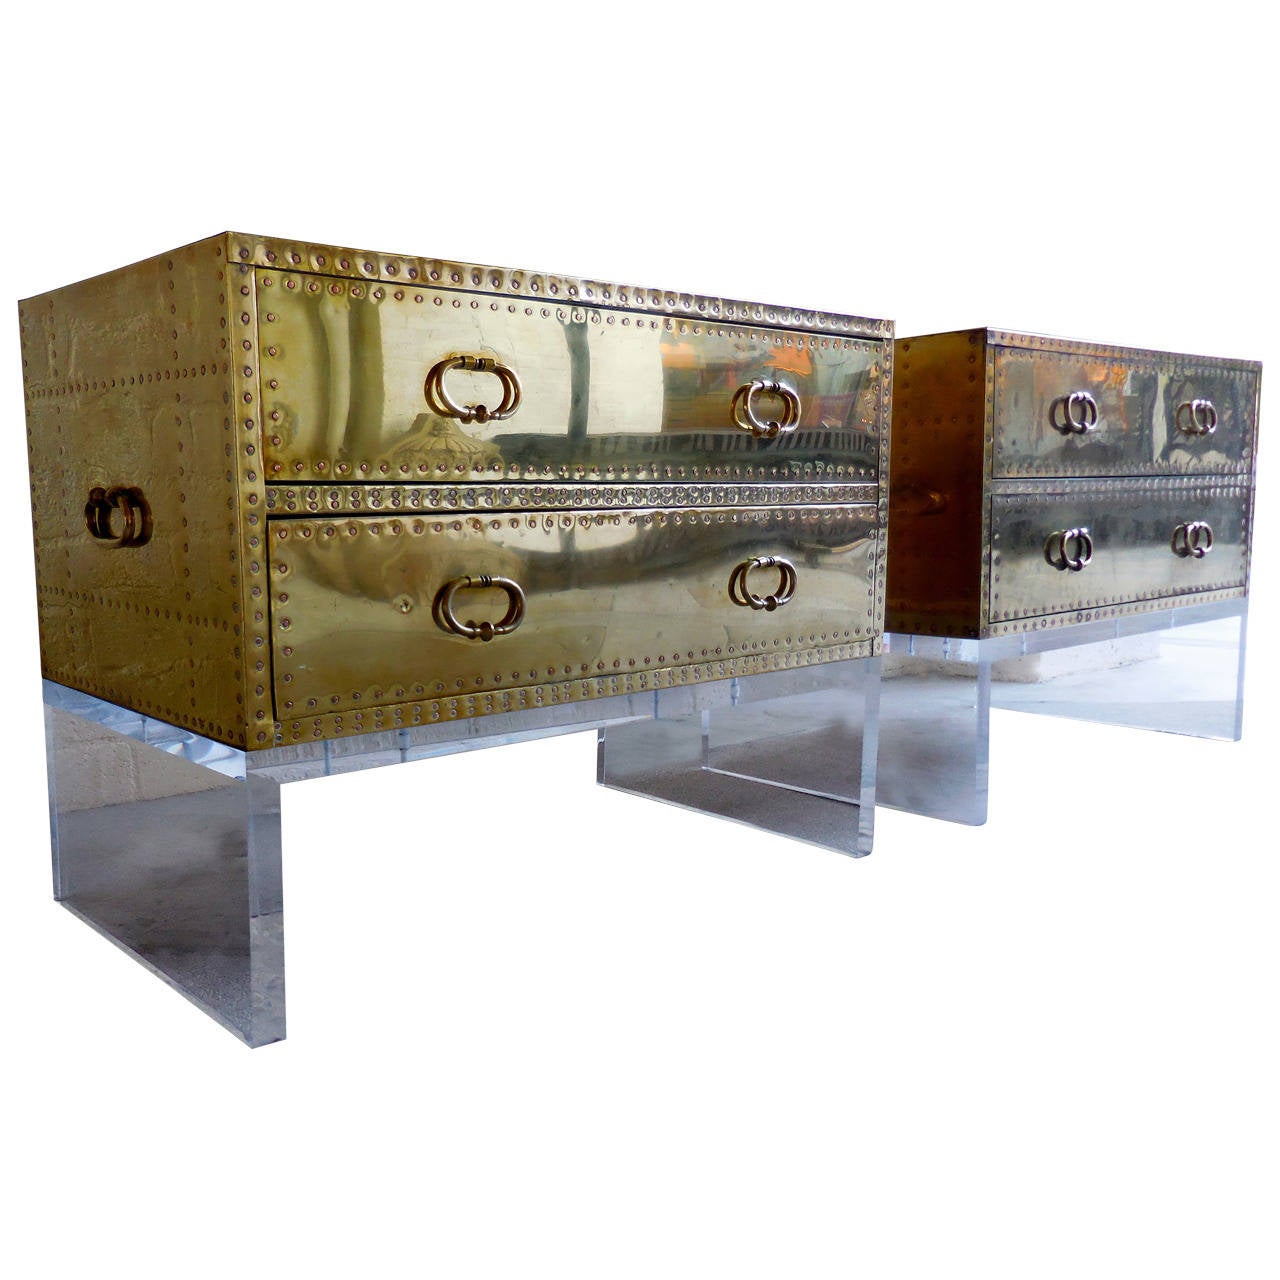 Sensational Pair of Two-Drawer Brass-Clad Chests by Sarreid, circa 1970s